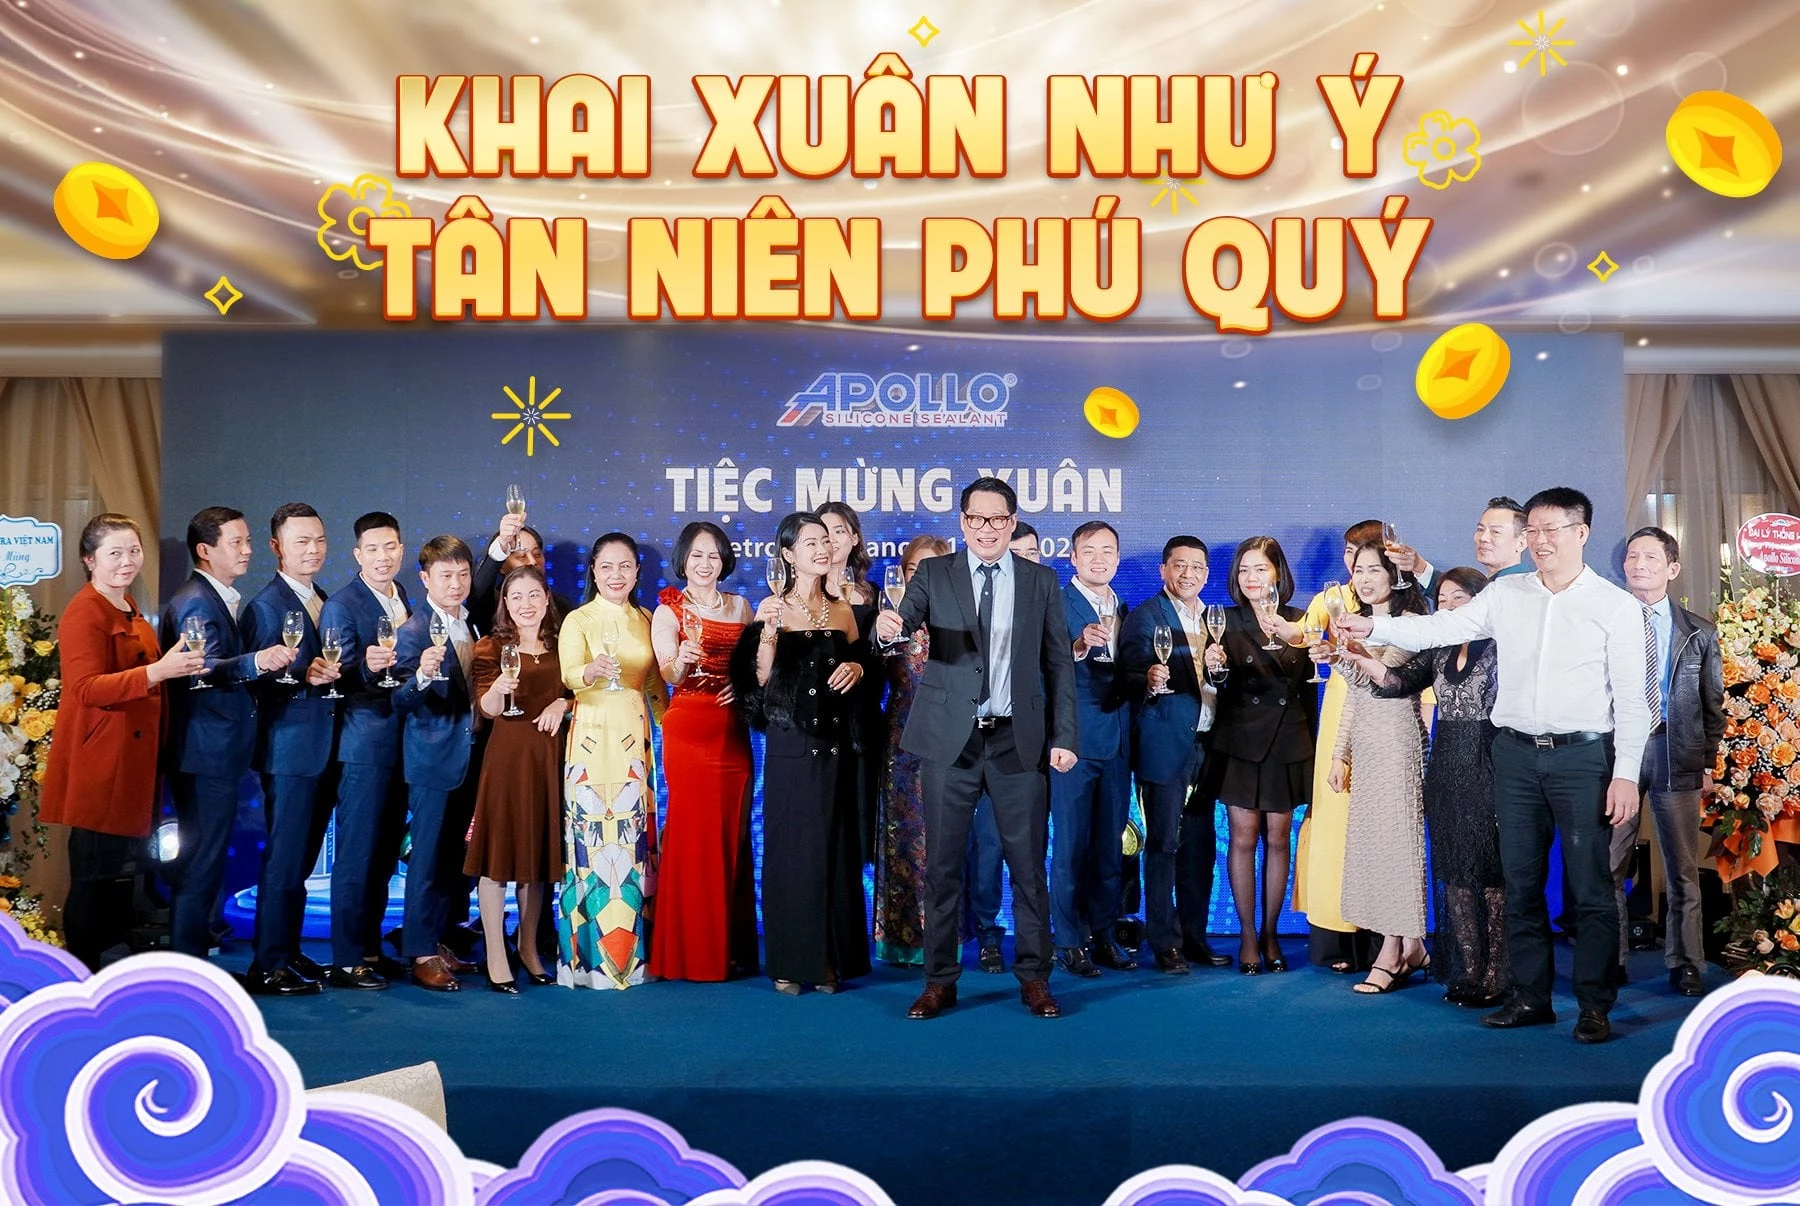 New Year Party at Quoc Huy Anh